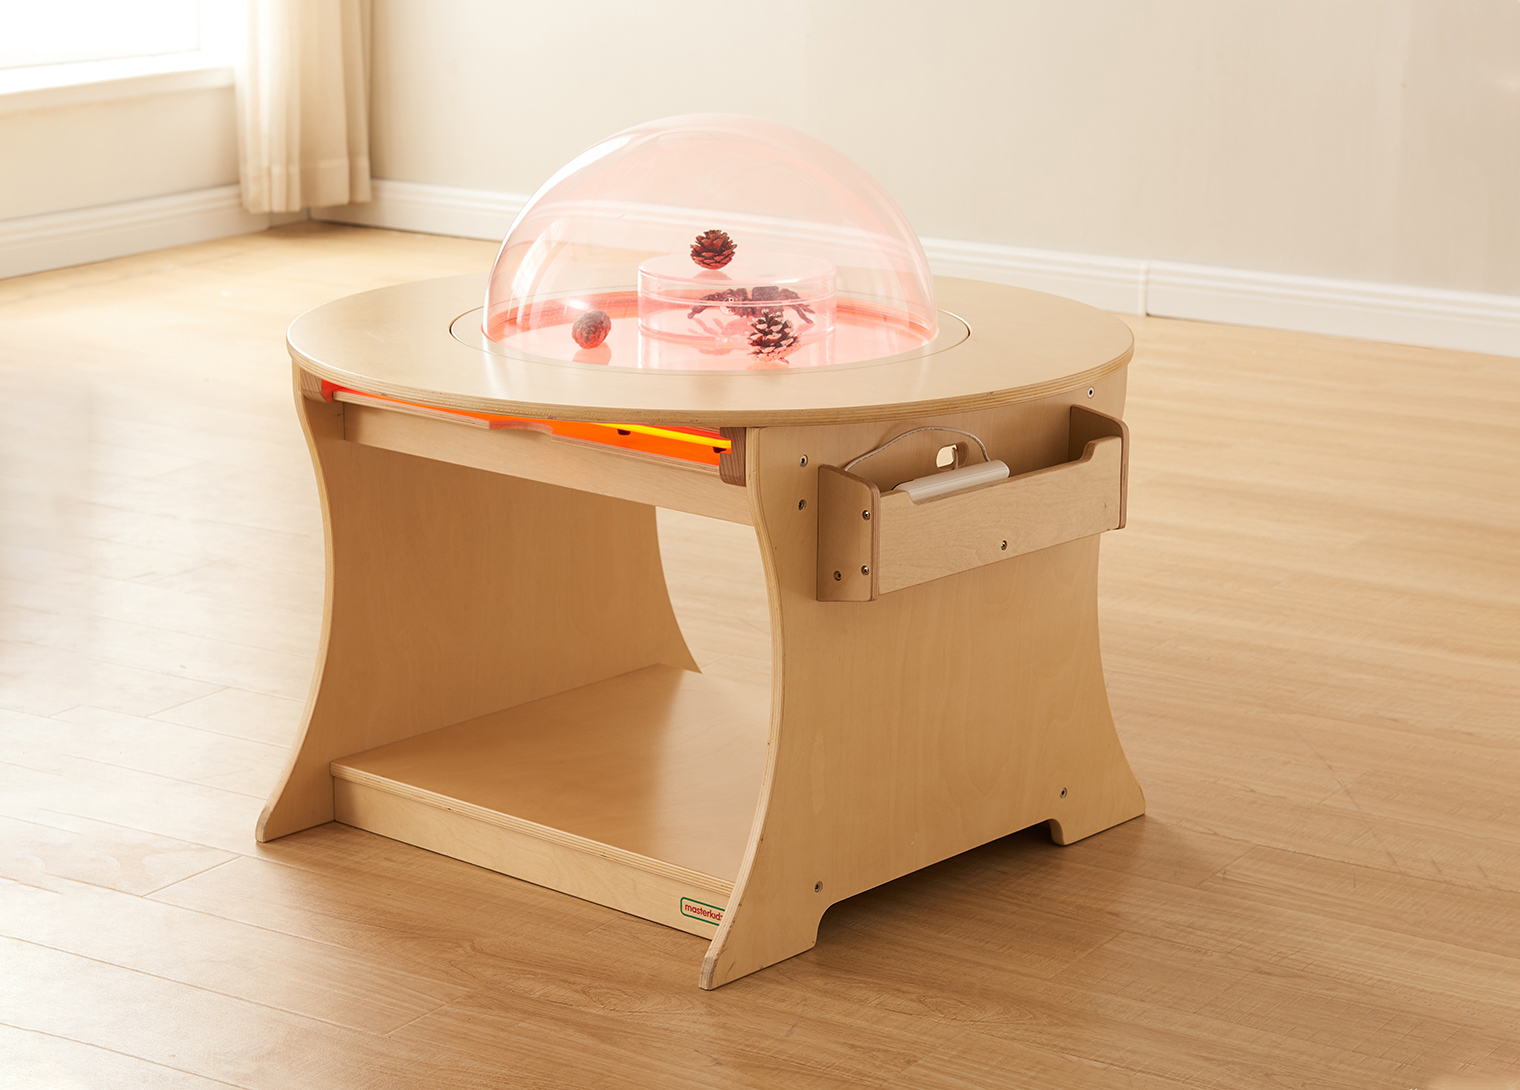 Hemispherical Observation Table (Light Panel Not Included)